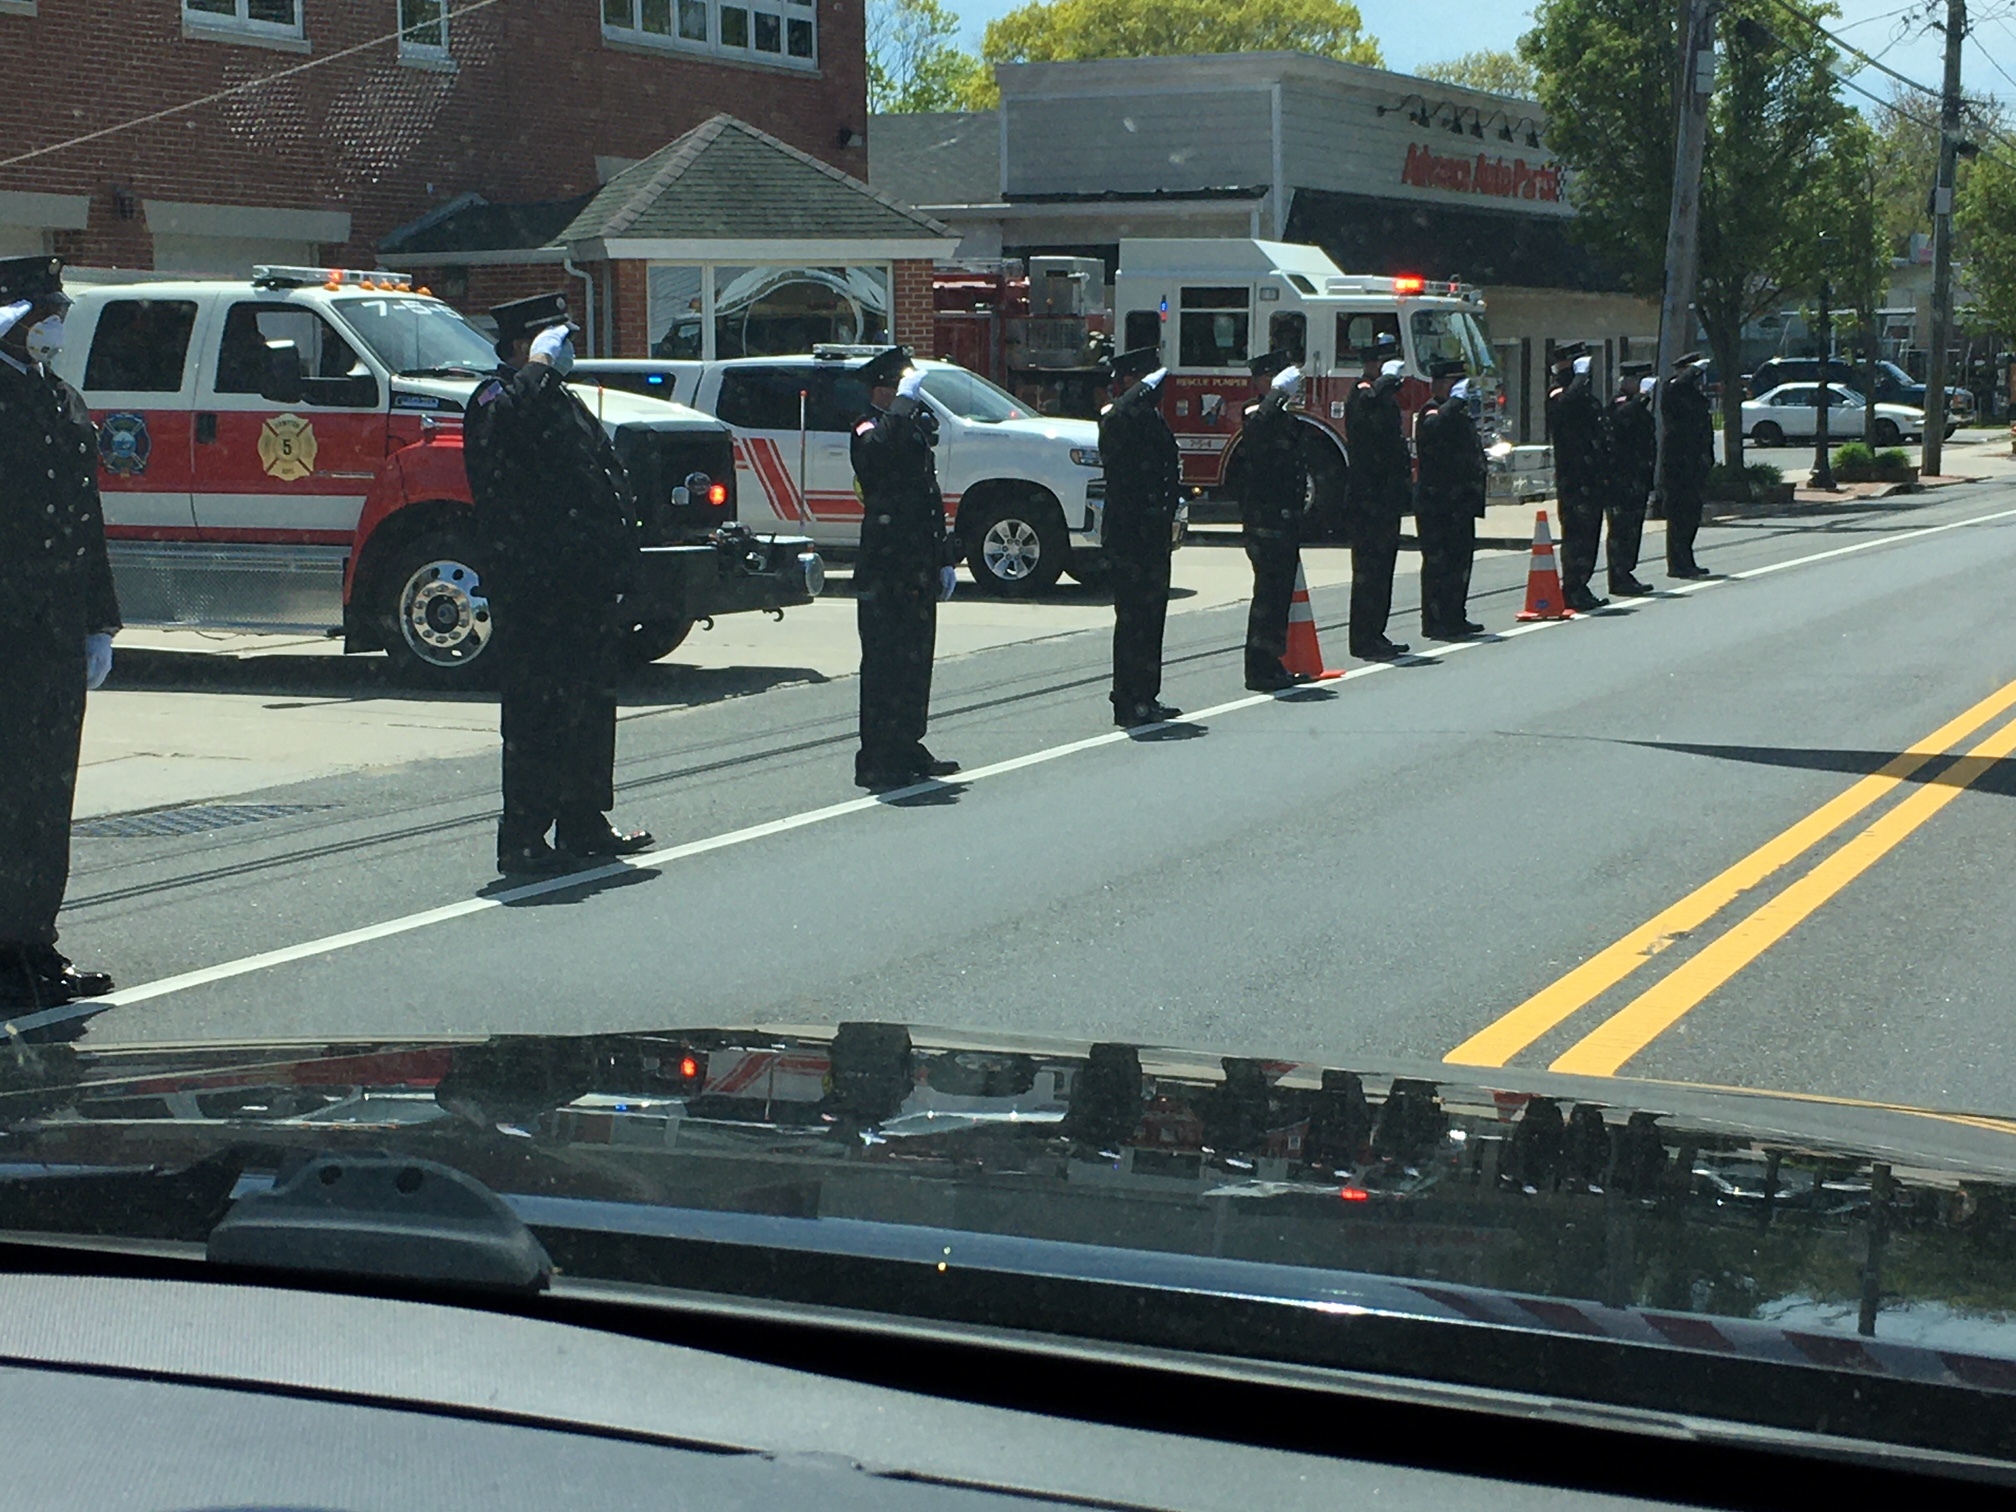 Firefighters saluted the funeral porcession as it passed. LORI SIDOR